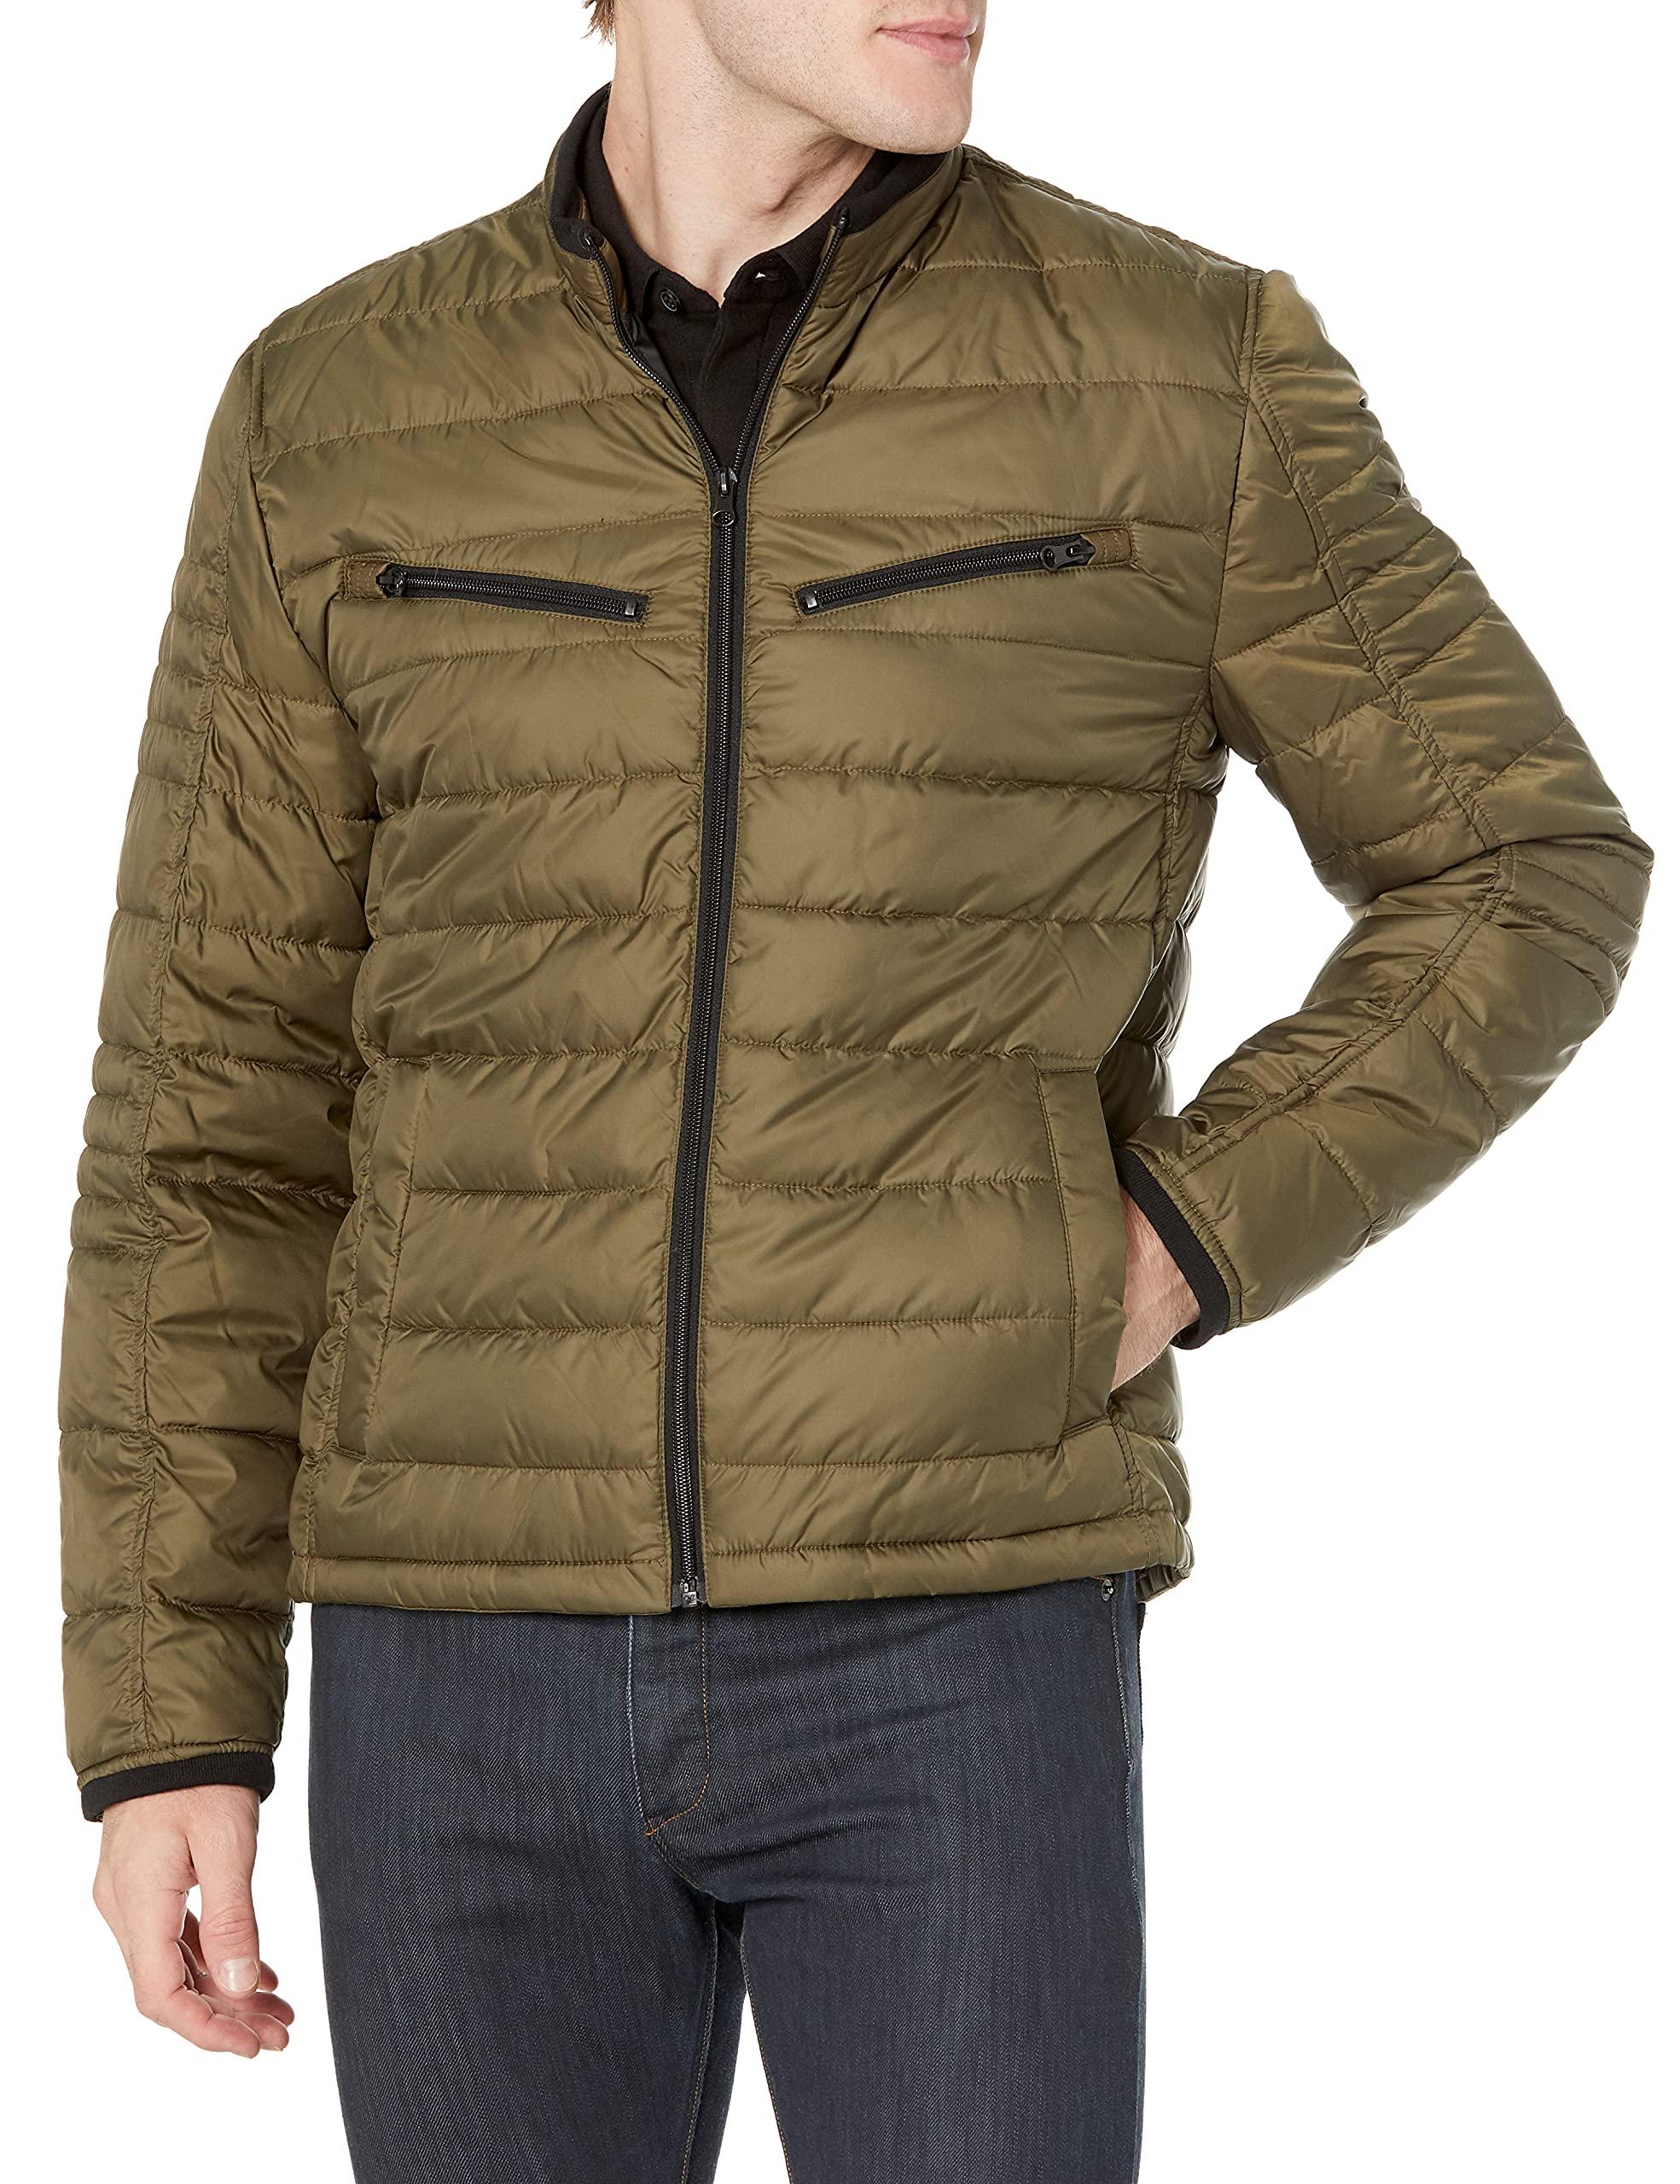 Andrew Marc Grymes Diamond Quilted Four Pocket Lightweight Field Jacket ...